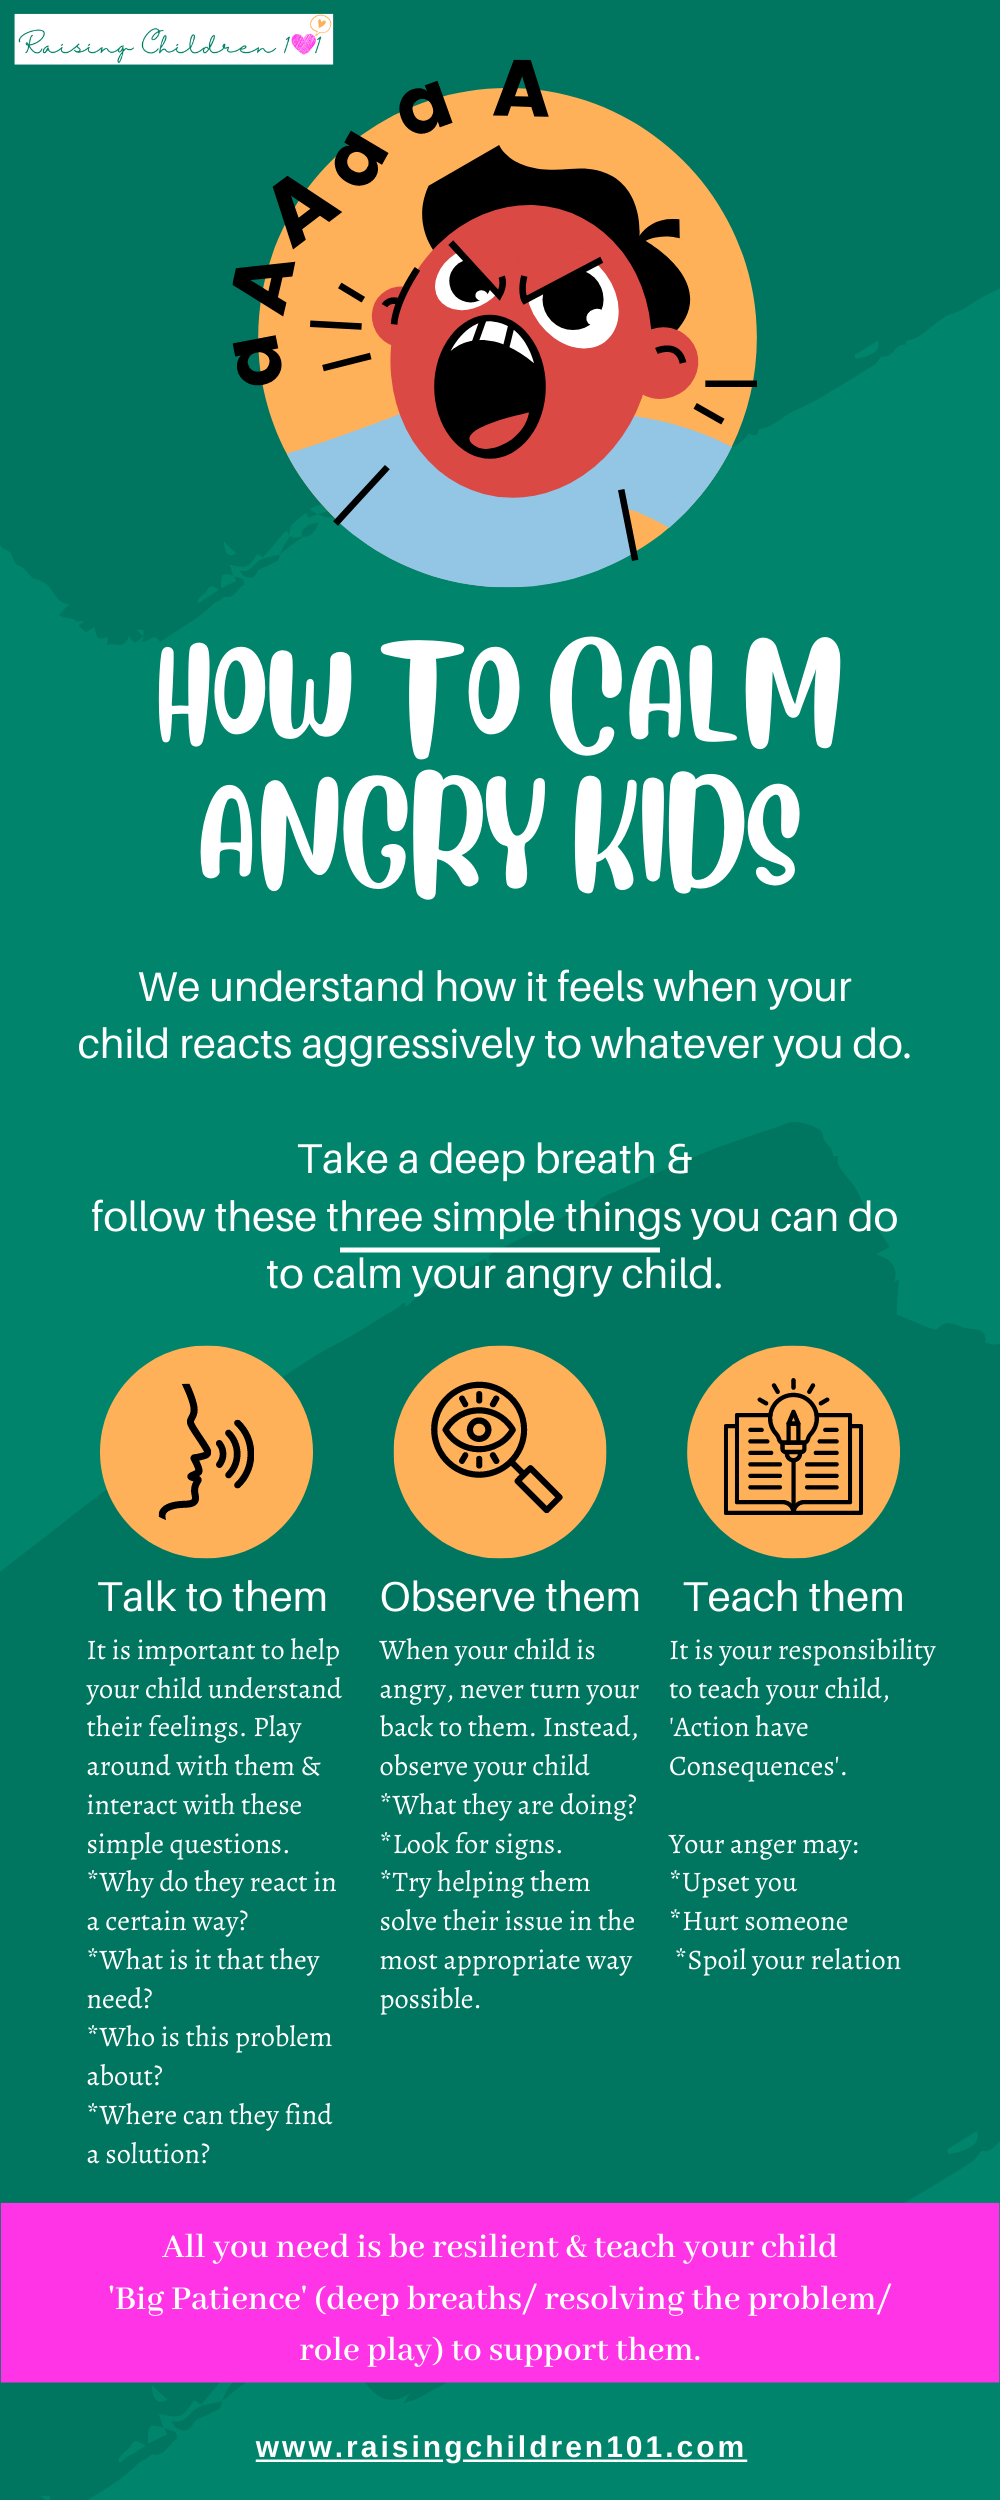 How to calm an angry child